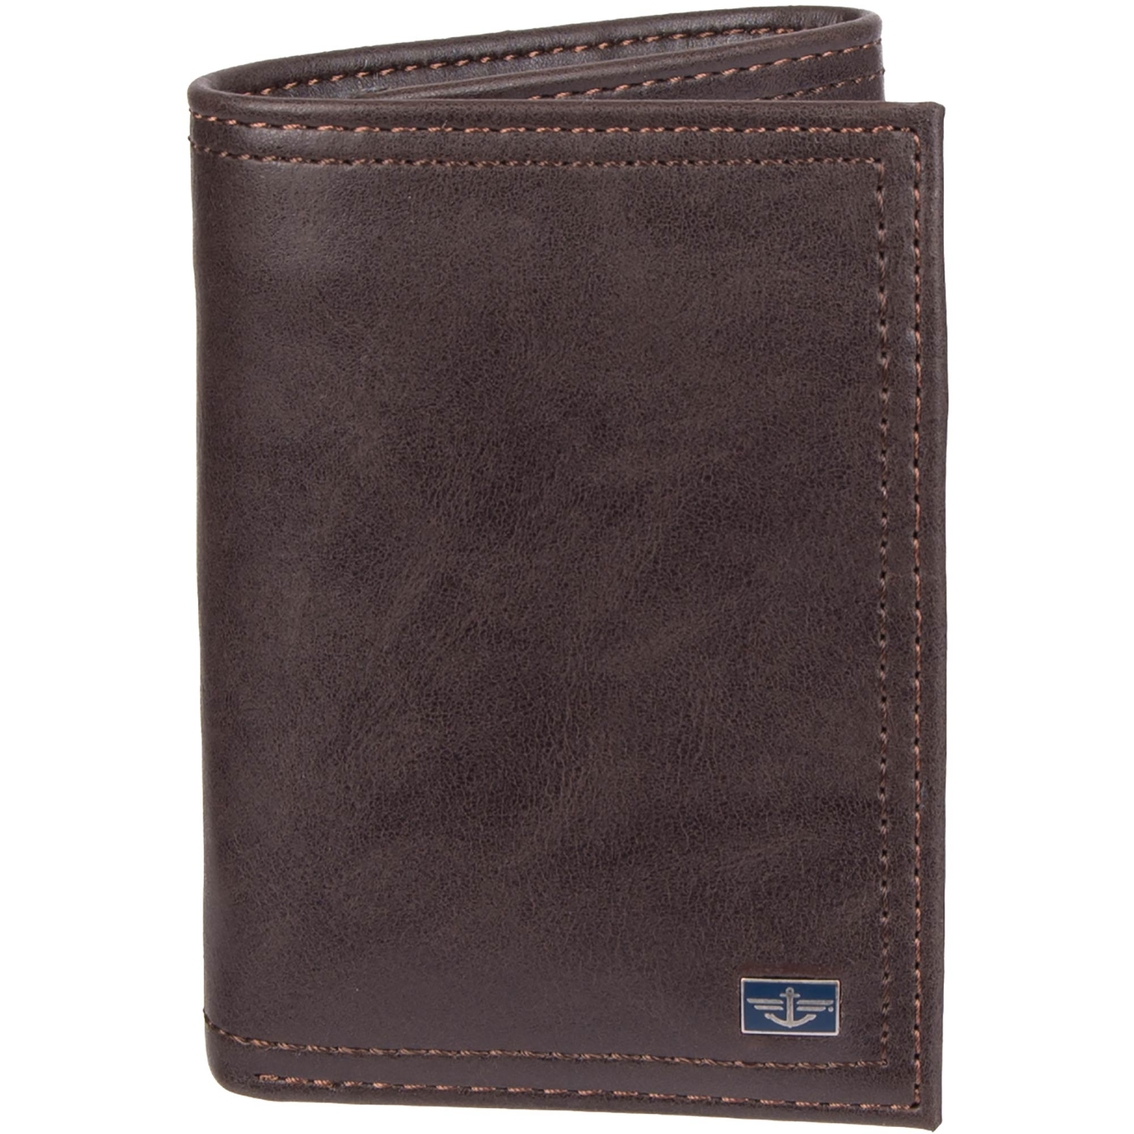 Dockers RFID Blocking Trifold Wallet with Zipper Pocket - Image 2 of 4